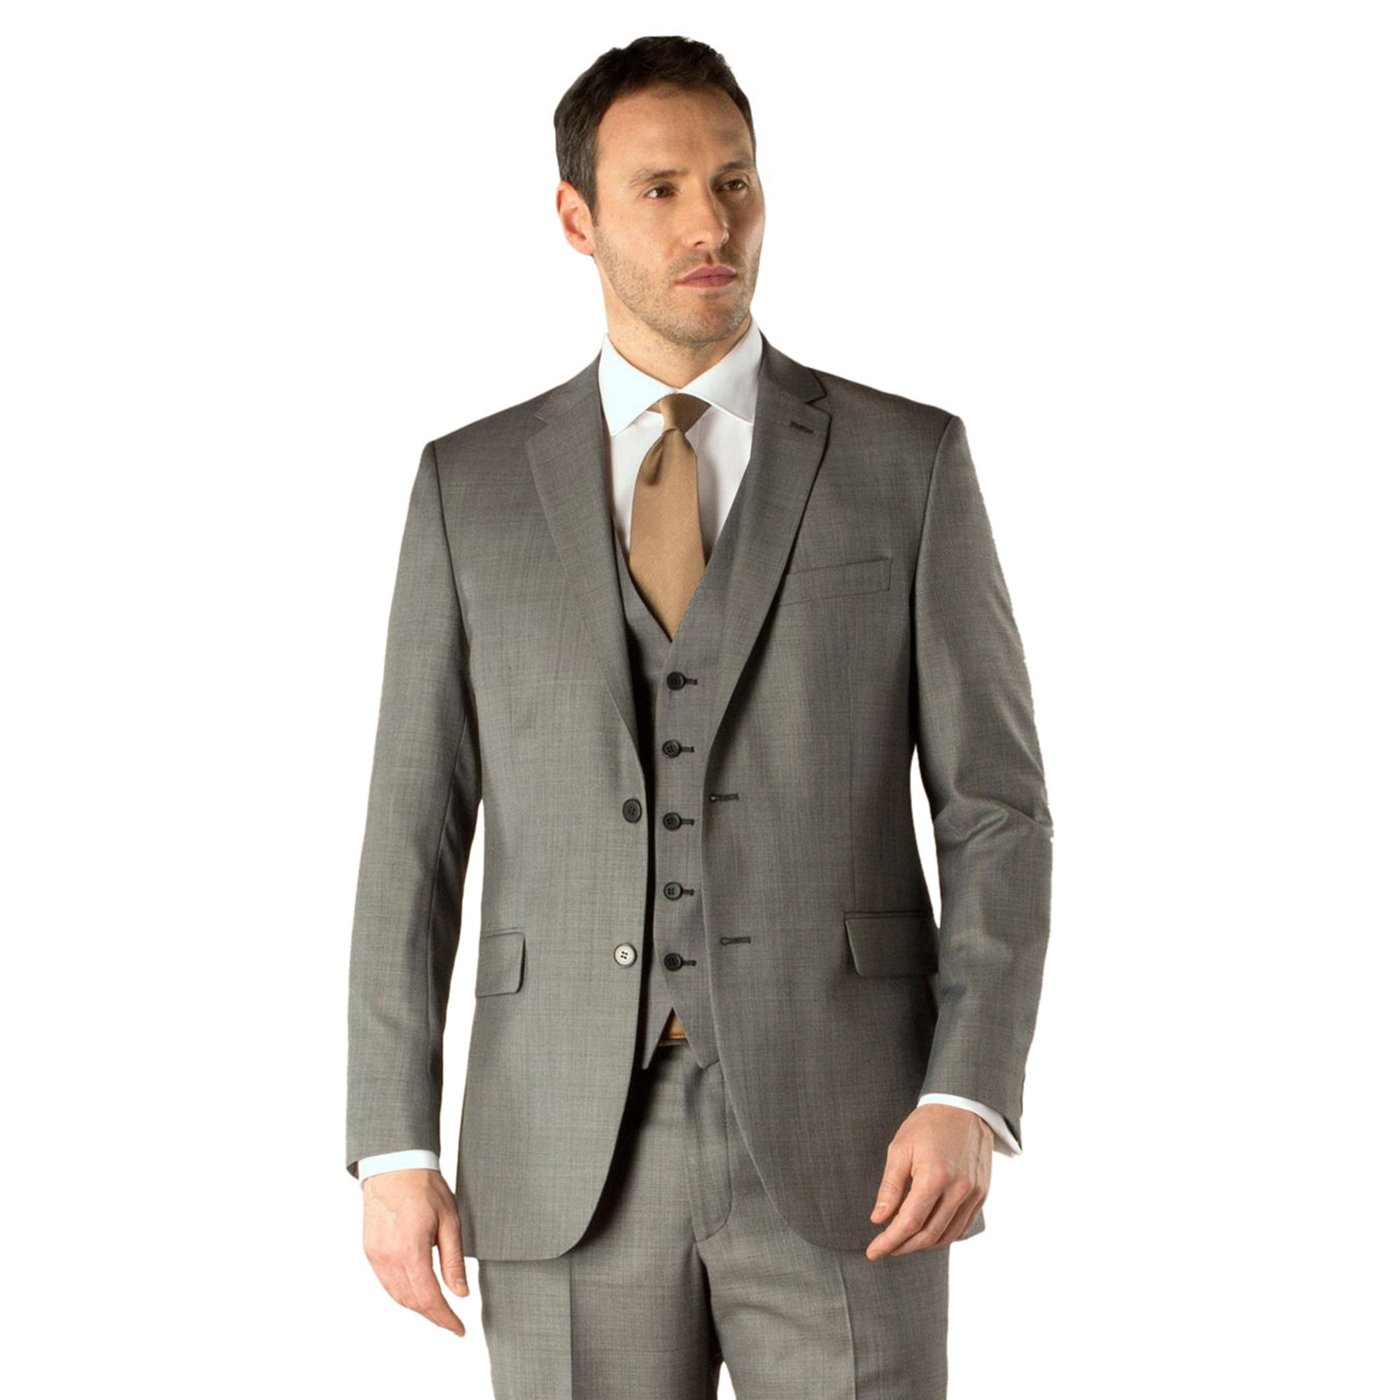 KARL JACKSON Grey pick and pick 2 button suit jacket